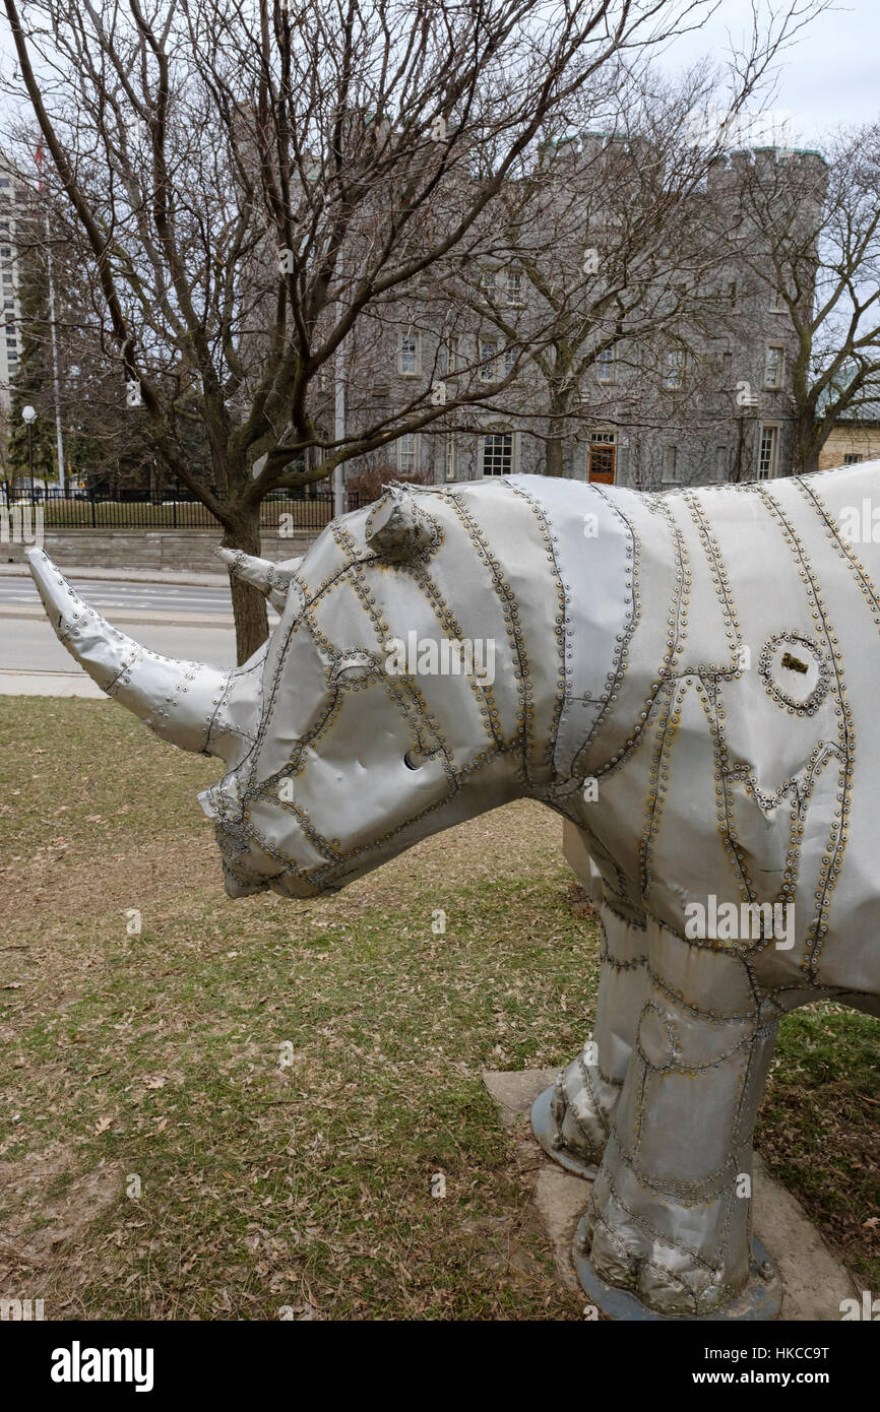 Picture of: Metal sculpture of a white rhino by artist Tom Benner in front of